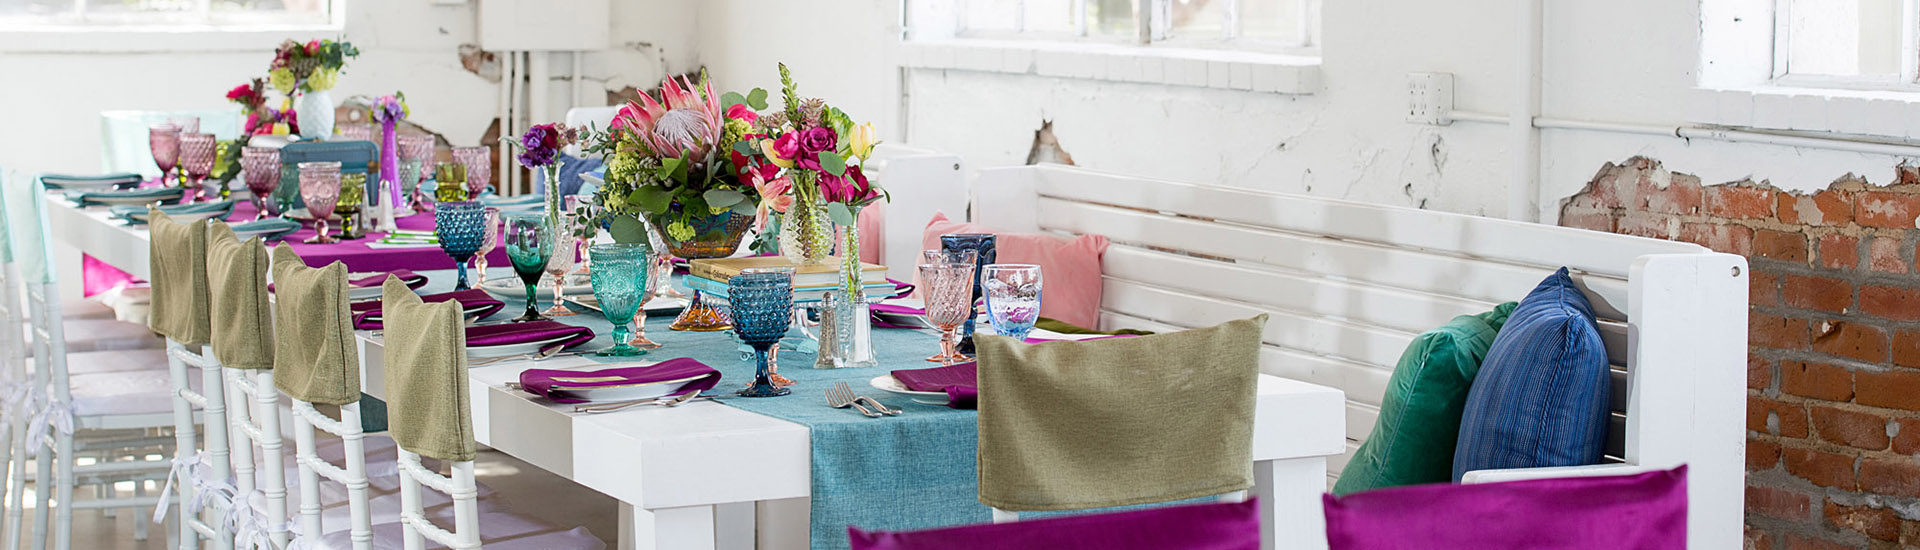 White table with white benches with pink, green and blue pillows, and white chairs with a white sea cover and olive green set cover. Blue linen table runner with a deep purple napkins and blue, teal and pink goblet glasses. In the center are flower arrangements with books underneath it.